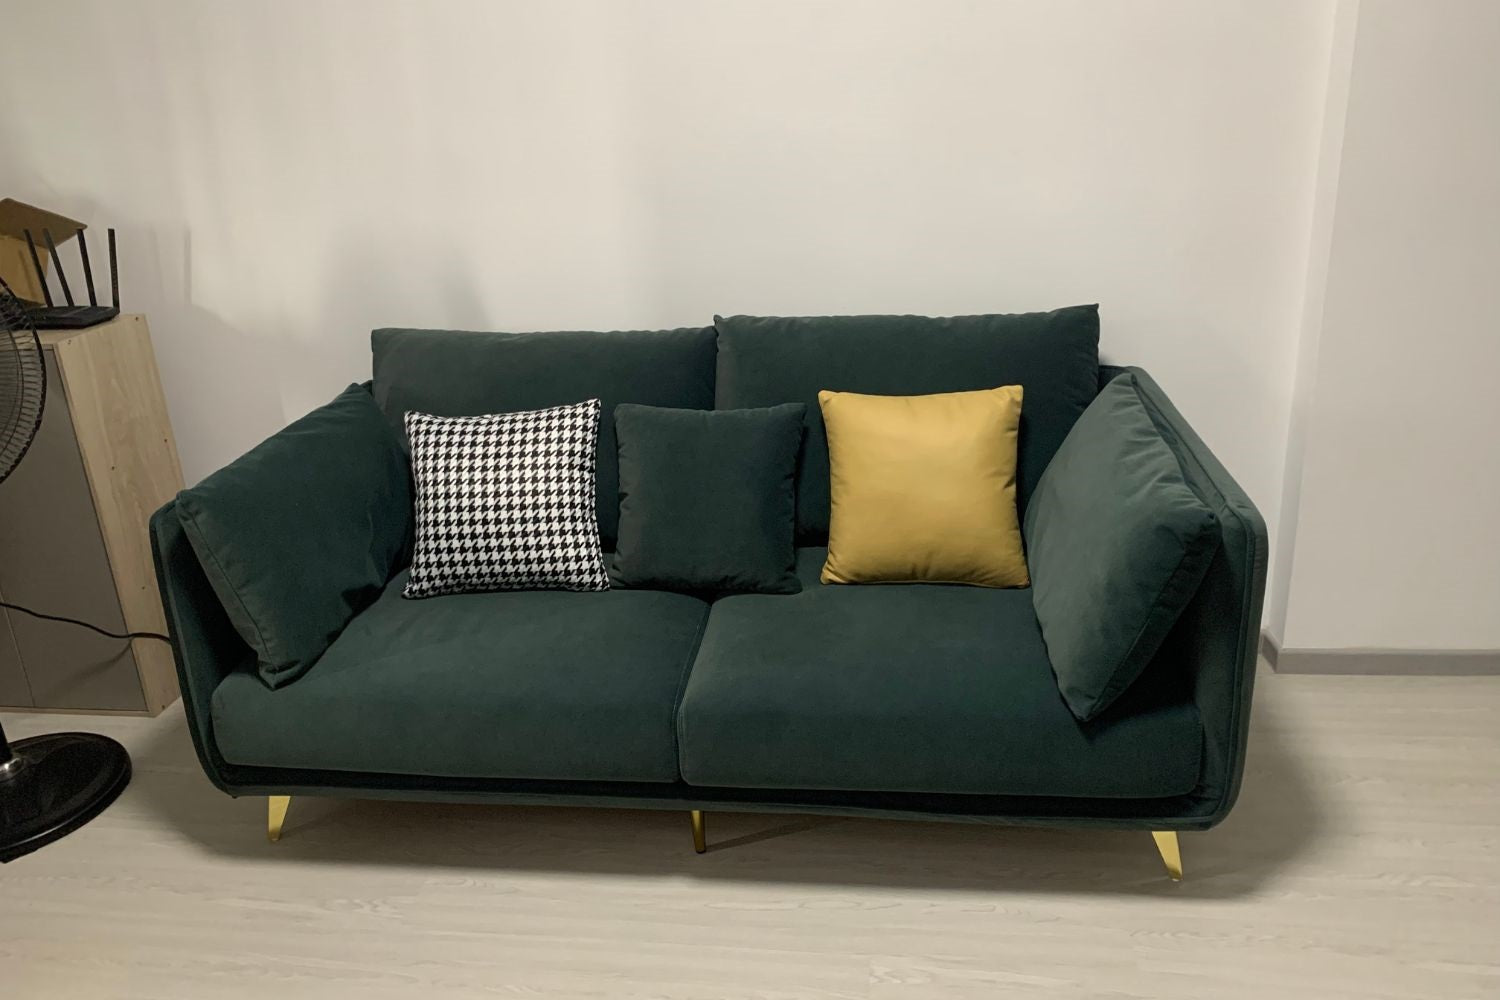 Green 180cm 2 seater Chris pet friendly fabric sofa in cusomter's home